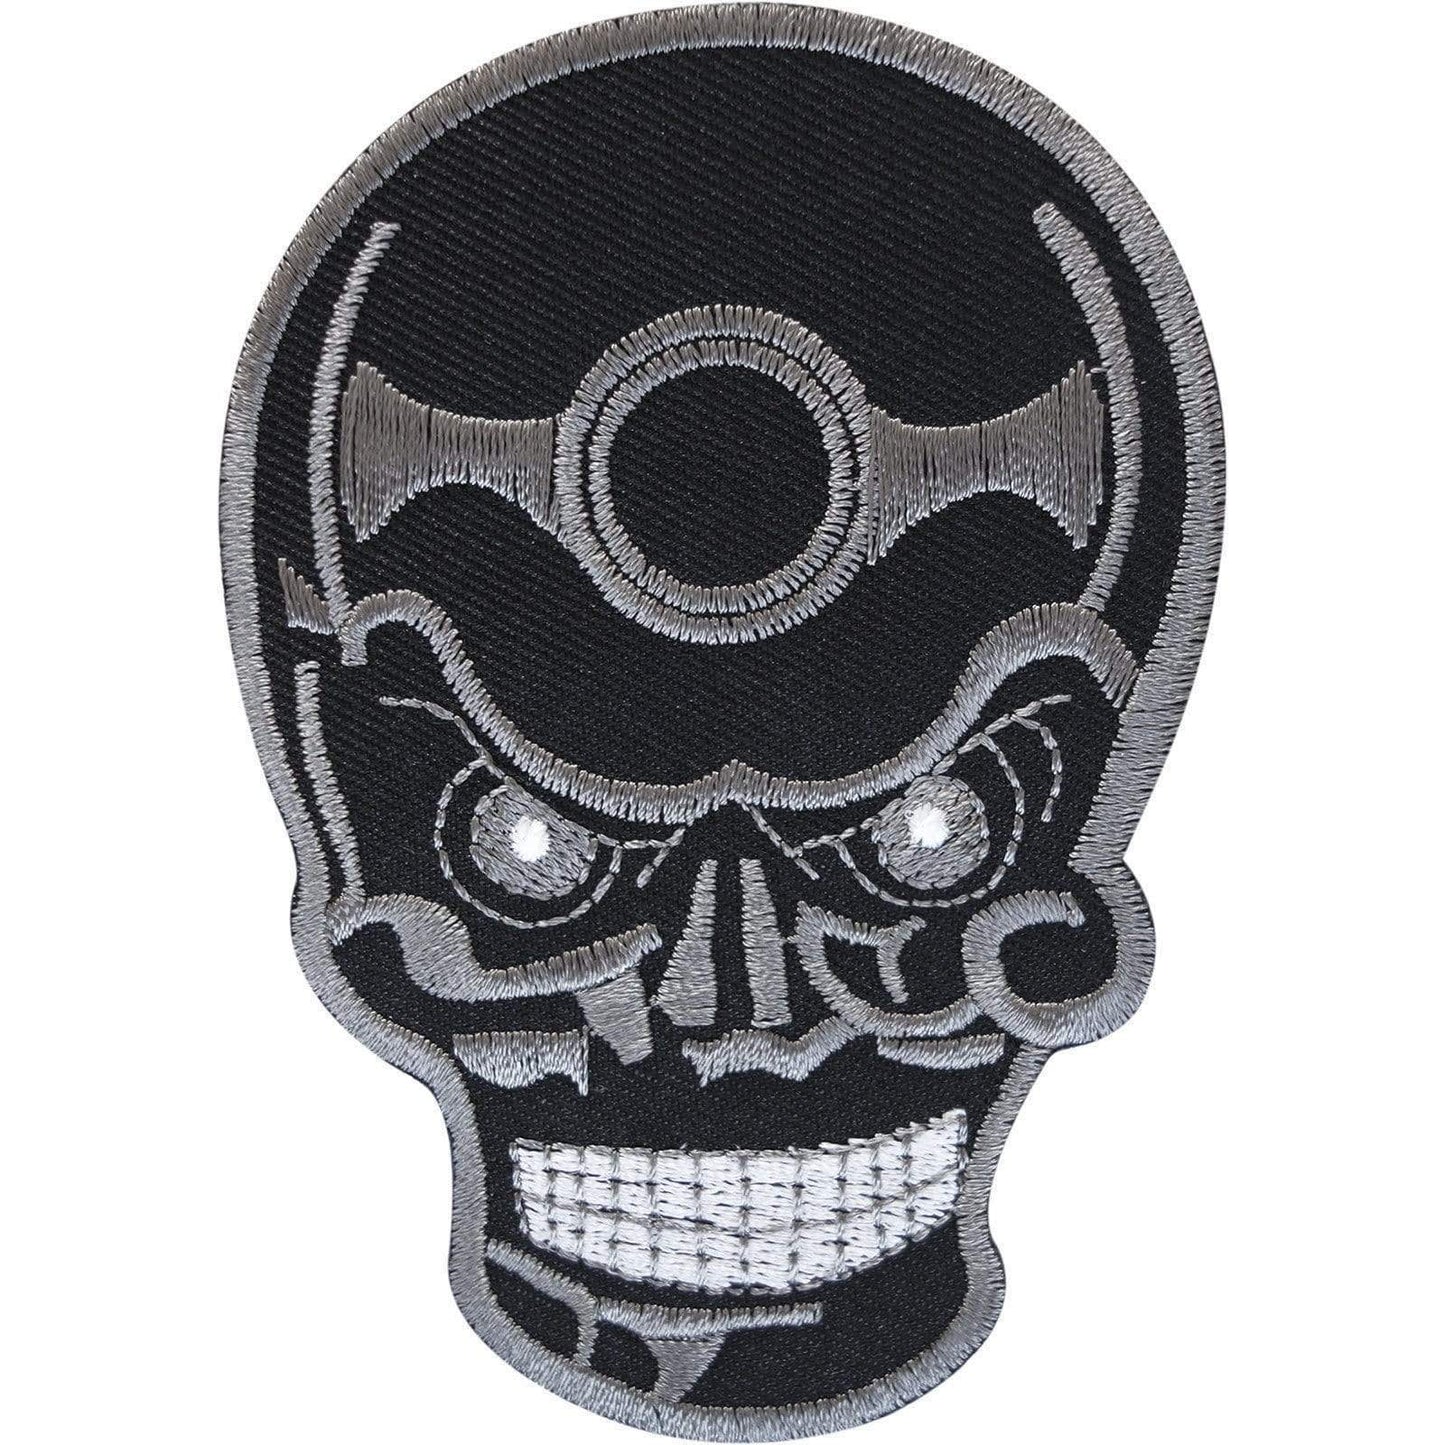 Embroidered Black Skull Patch Badge Iron Sew On Clothes Jacket Jeans Bag T Shirt